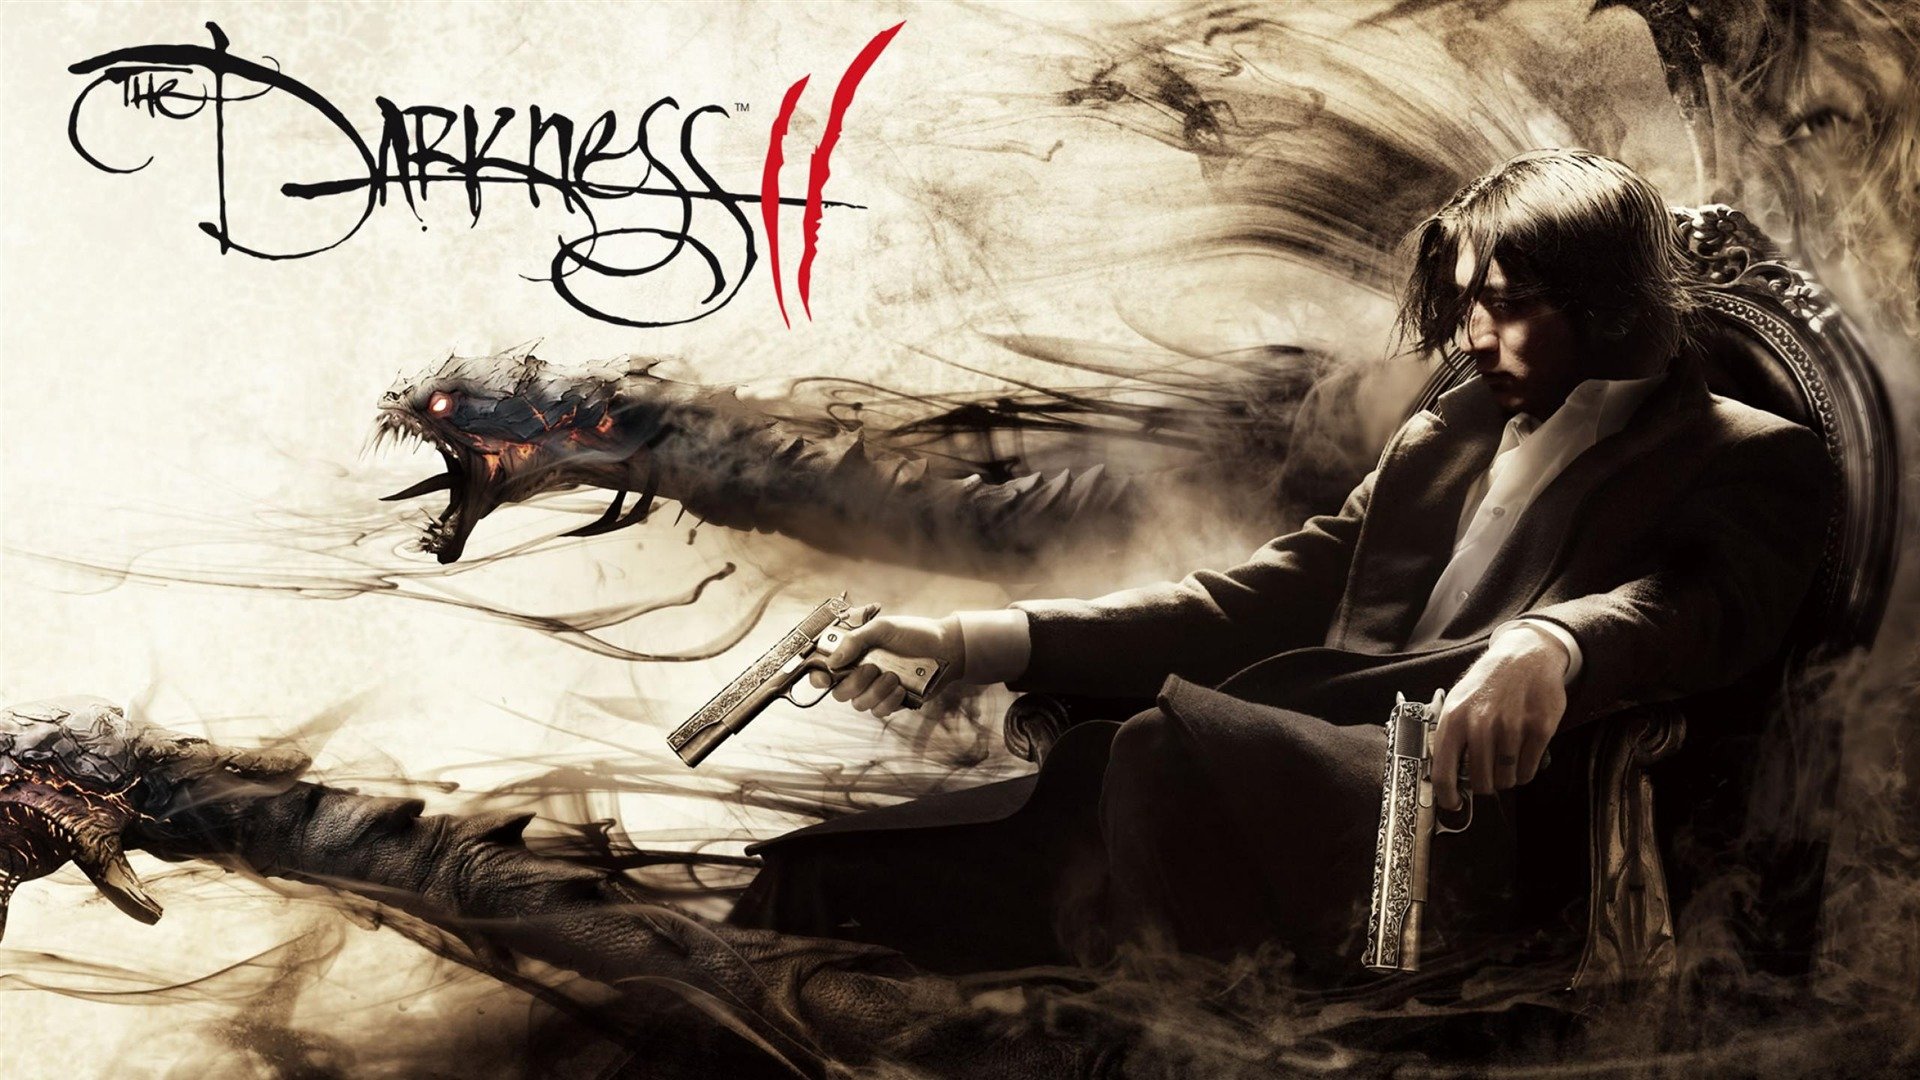 The Darkness 2 Game HD Wallpaper